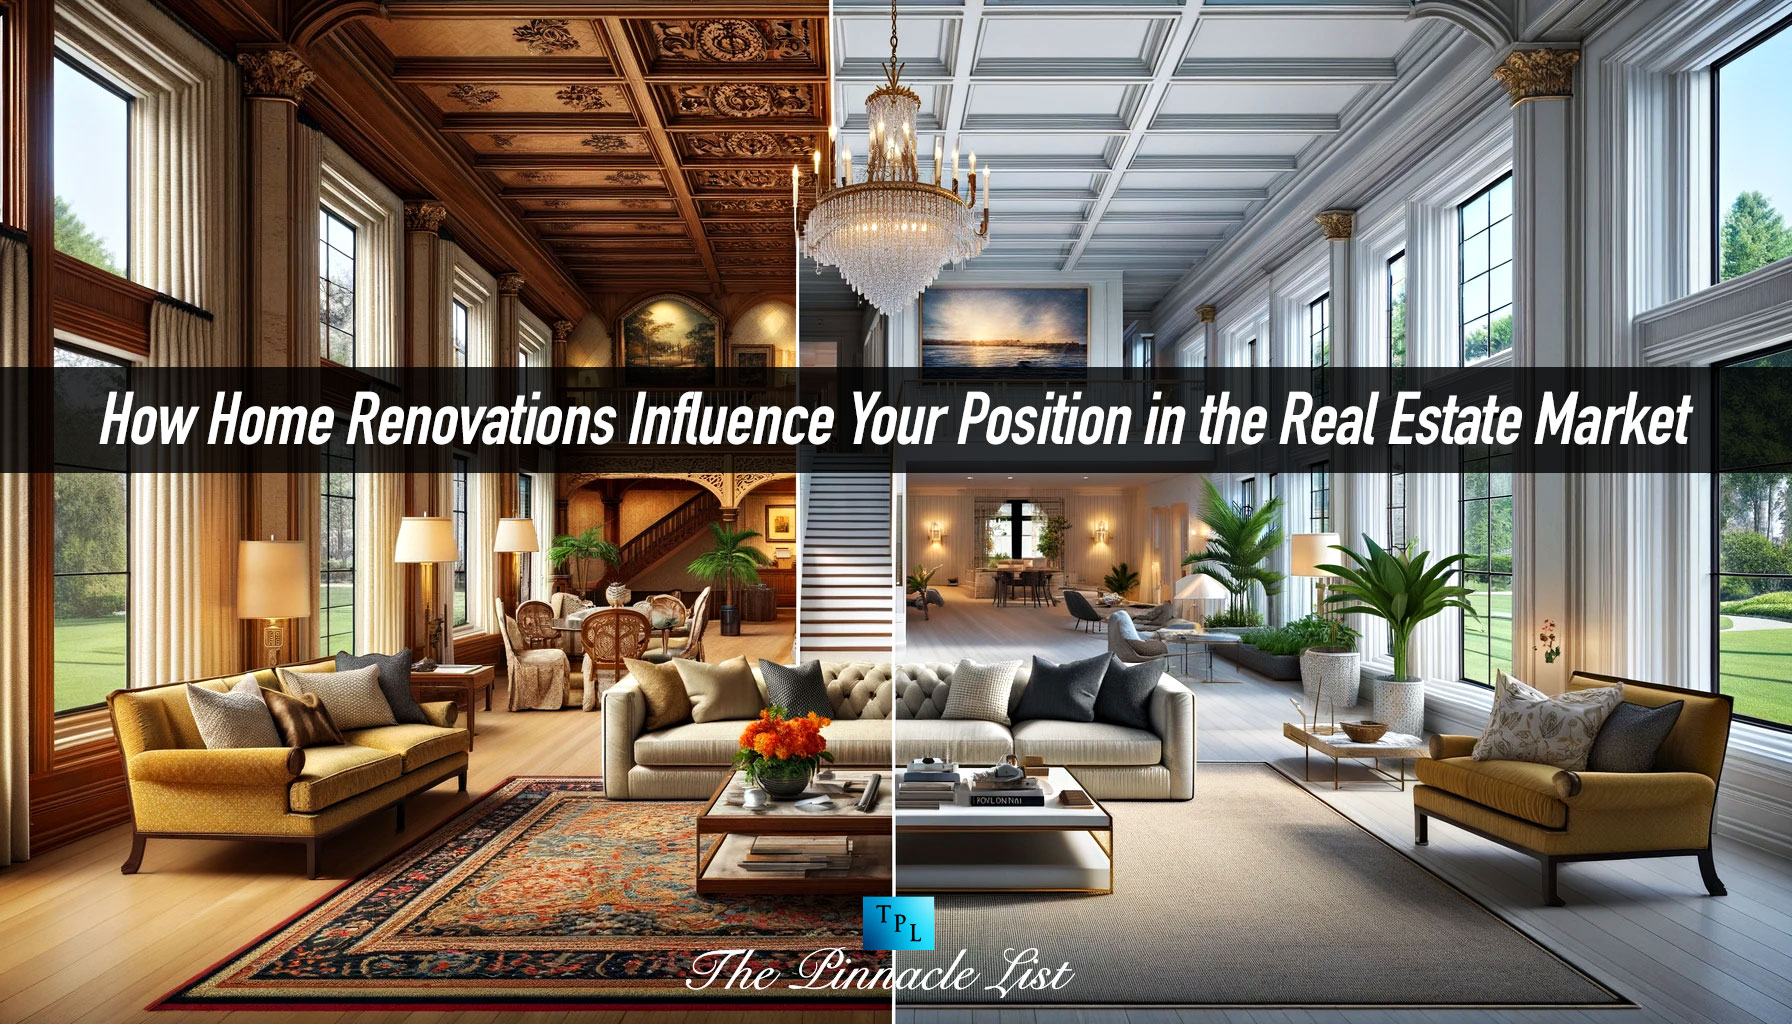 How Home Renovations Influence Your Position in the Real Estate Market